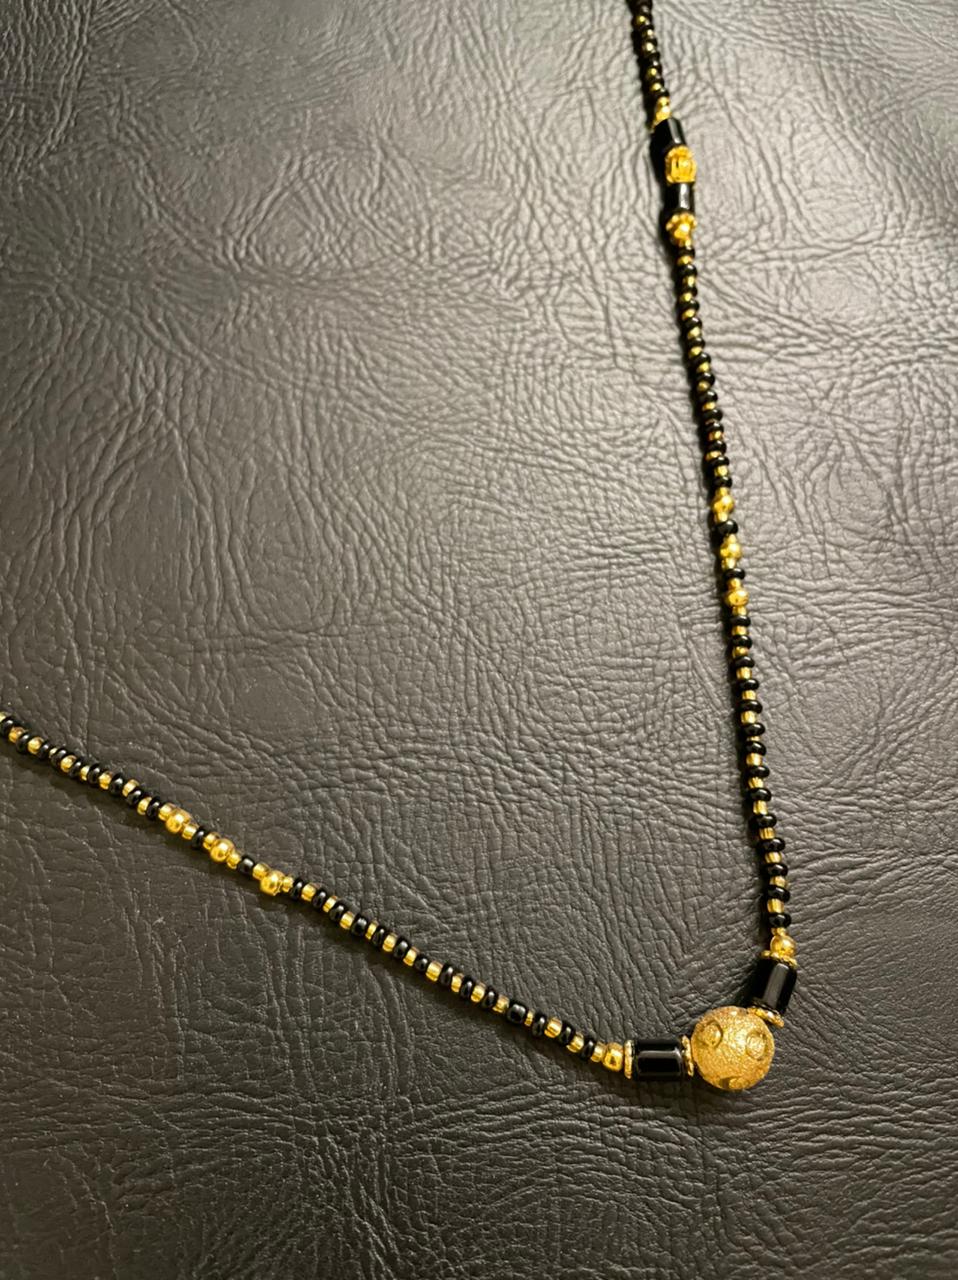 image for Long Mangalsutra Designs Gold Plated Ball Shape Pendant Black Gold Beads (32 Inches)